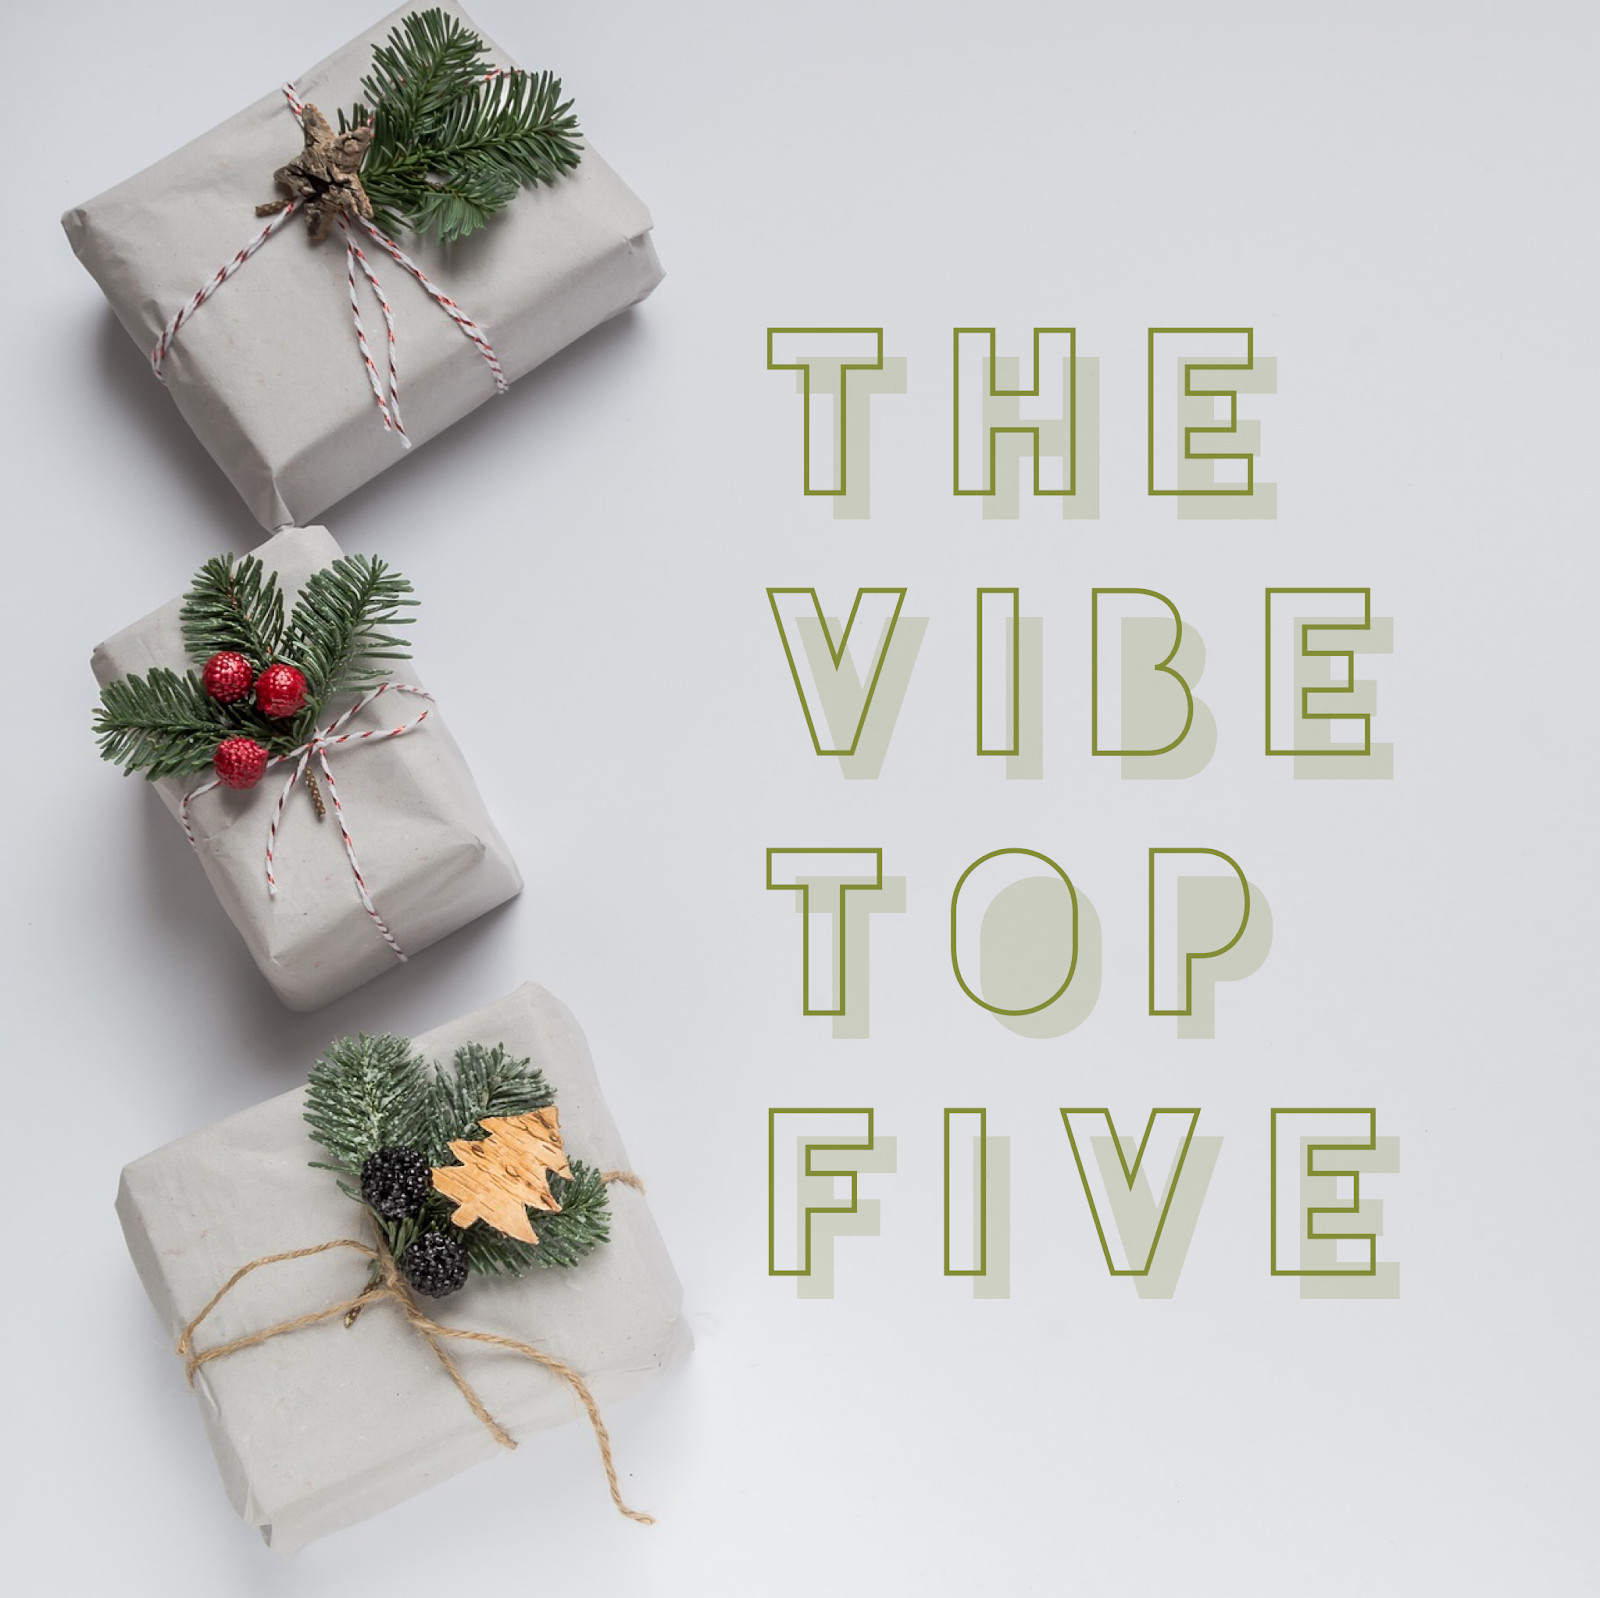 Holiday Gift Ideas Under $25
 The Vibe Top Five – Environmentally Friendly Holiday Gift